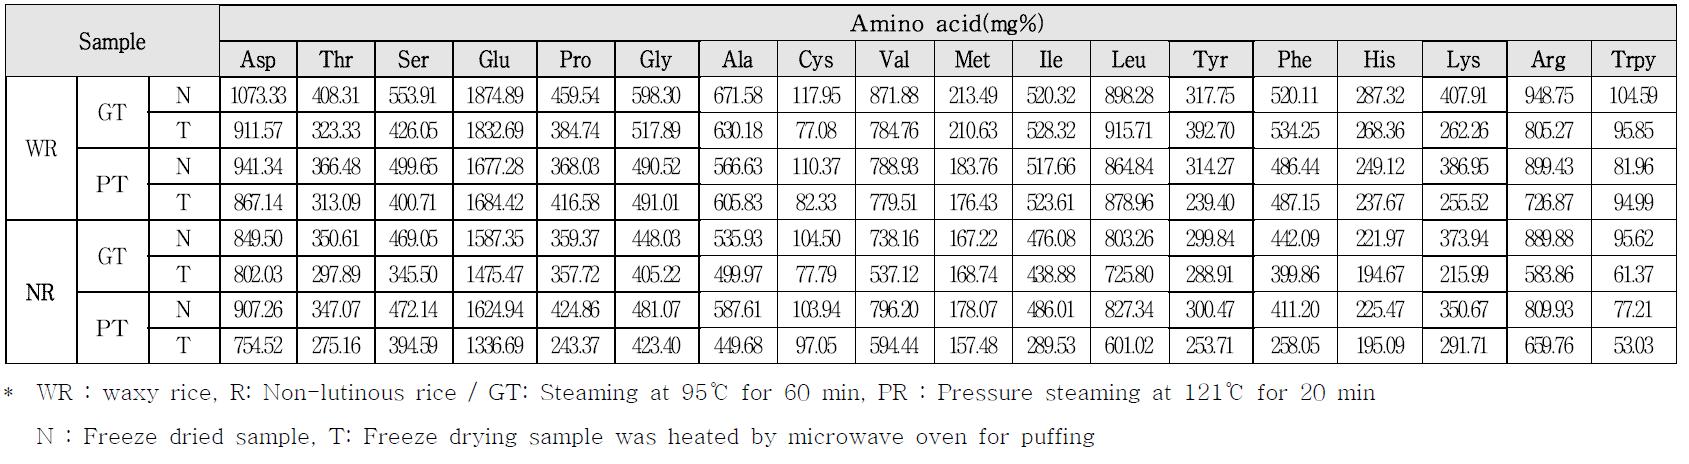 Effect of microwave heating on amino acid contents of Olbyeossal made from rough rice